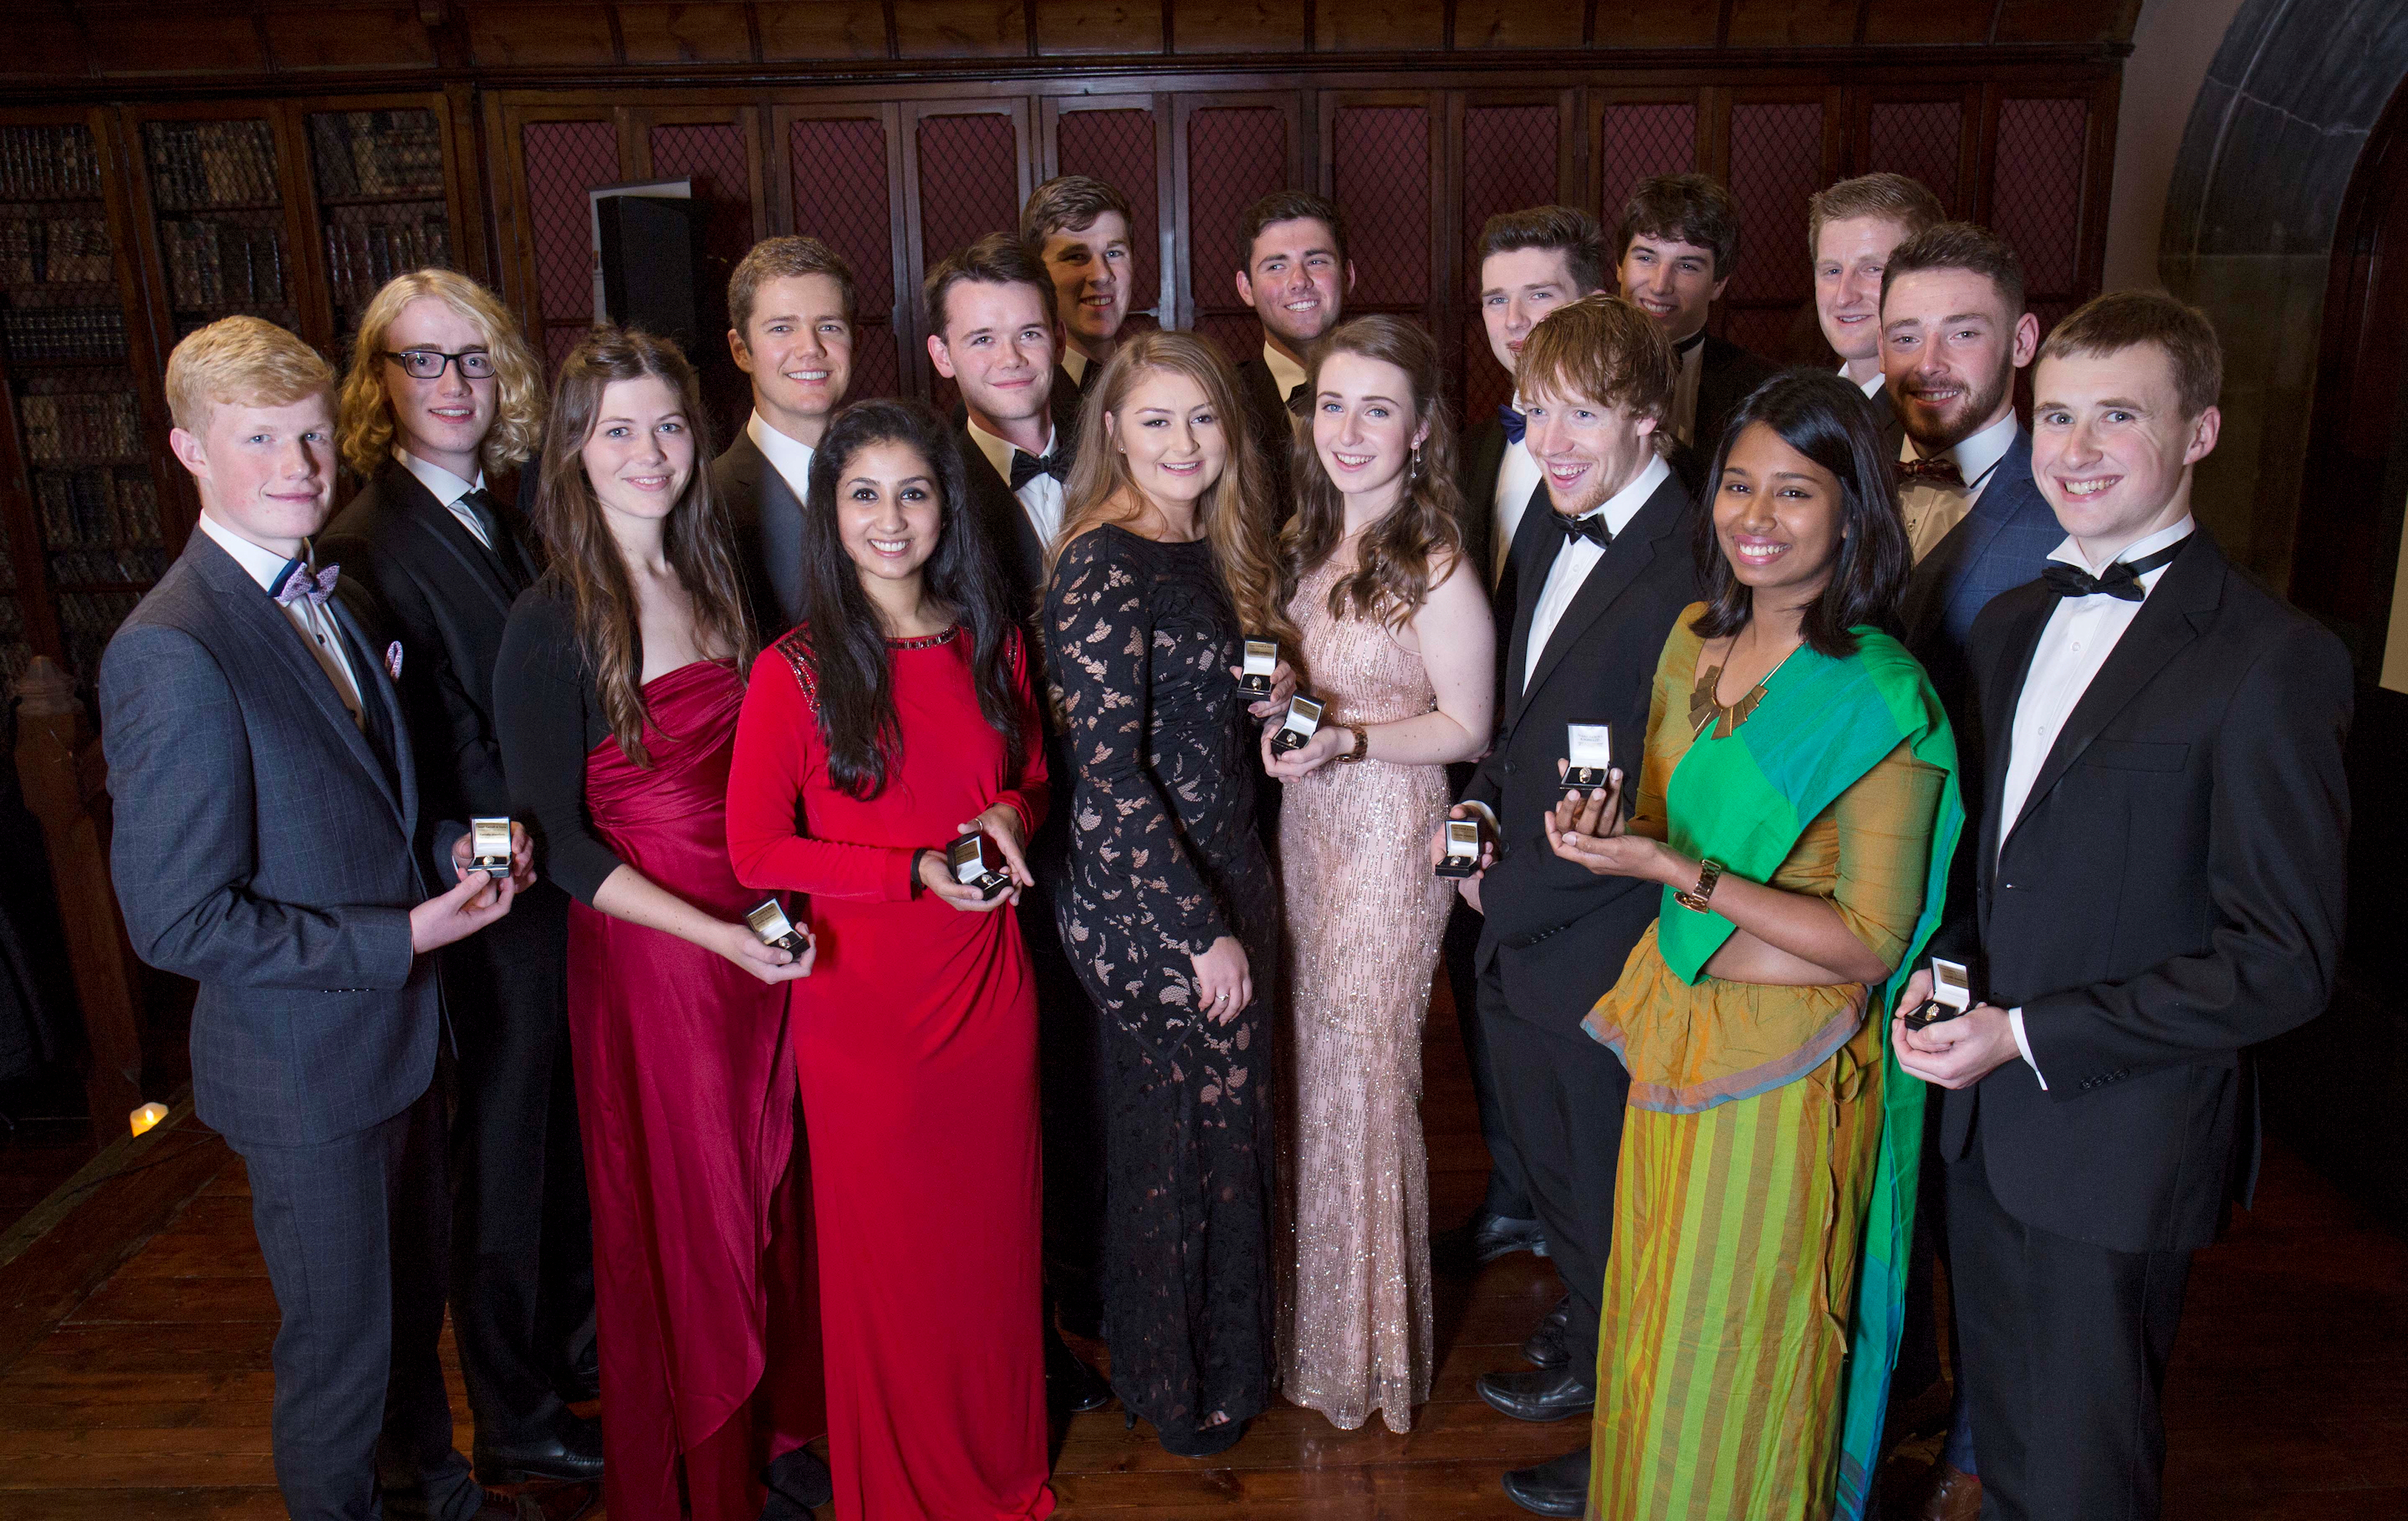 UCC Quercus Talented Students’ Award Gala – December 1st